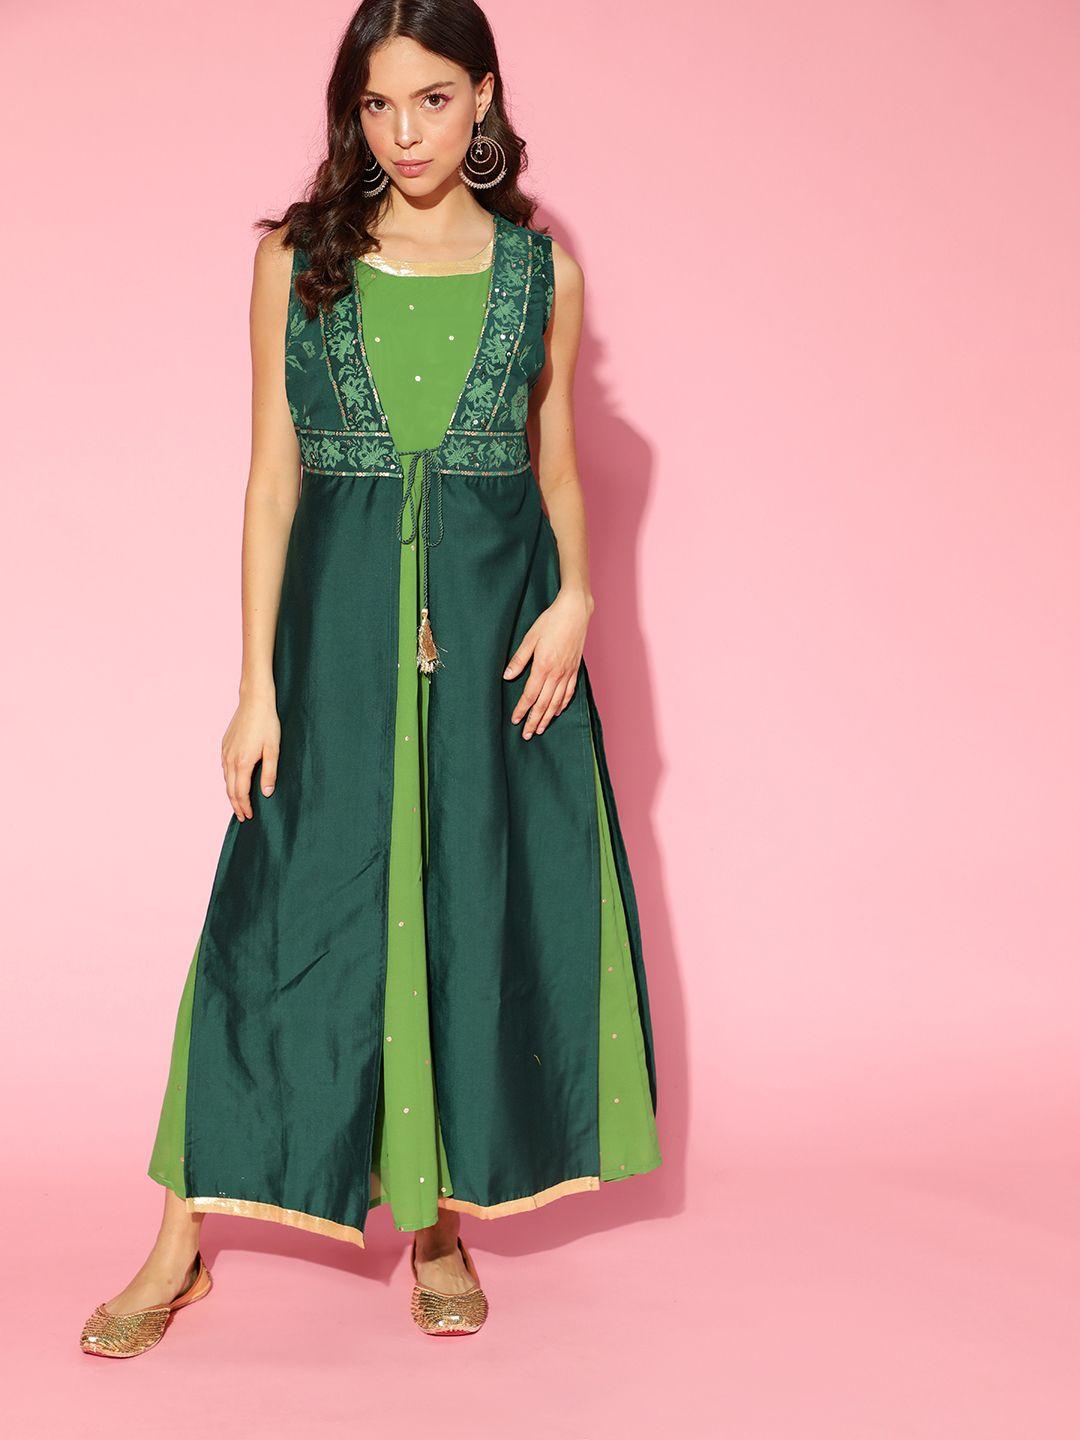 all-about-you-green-&-golden-polka-dots-printed-ethnic-maxi-dress-with-longline-shrug